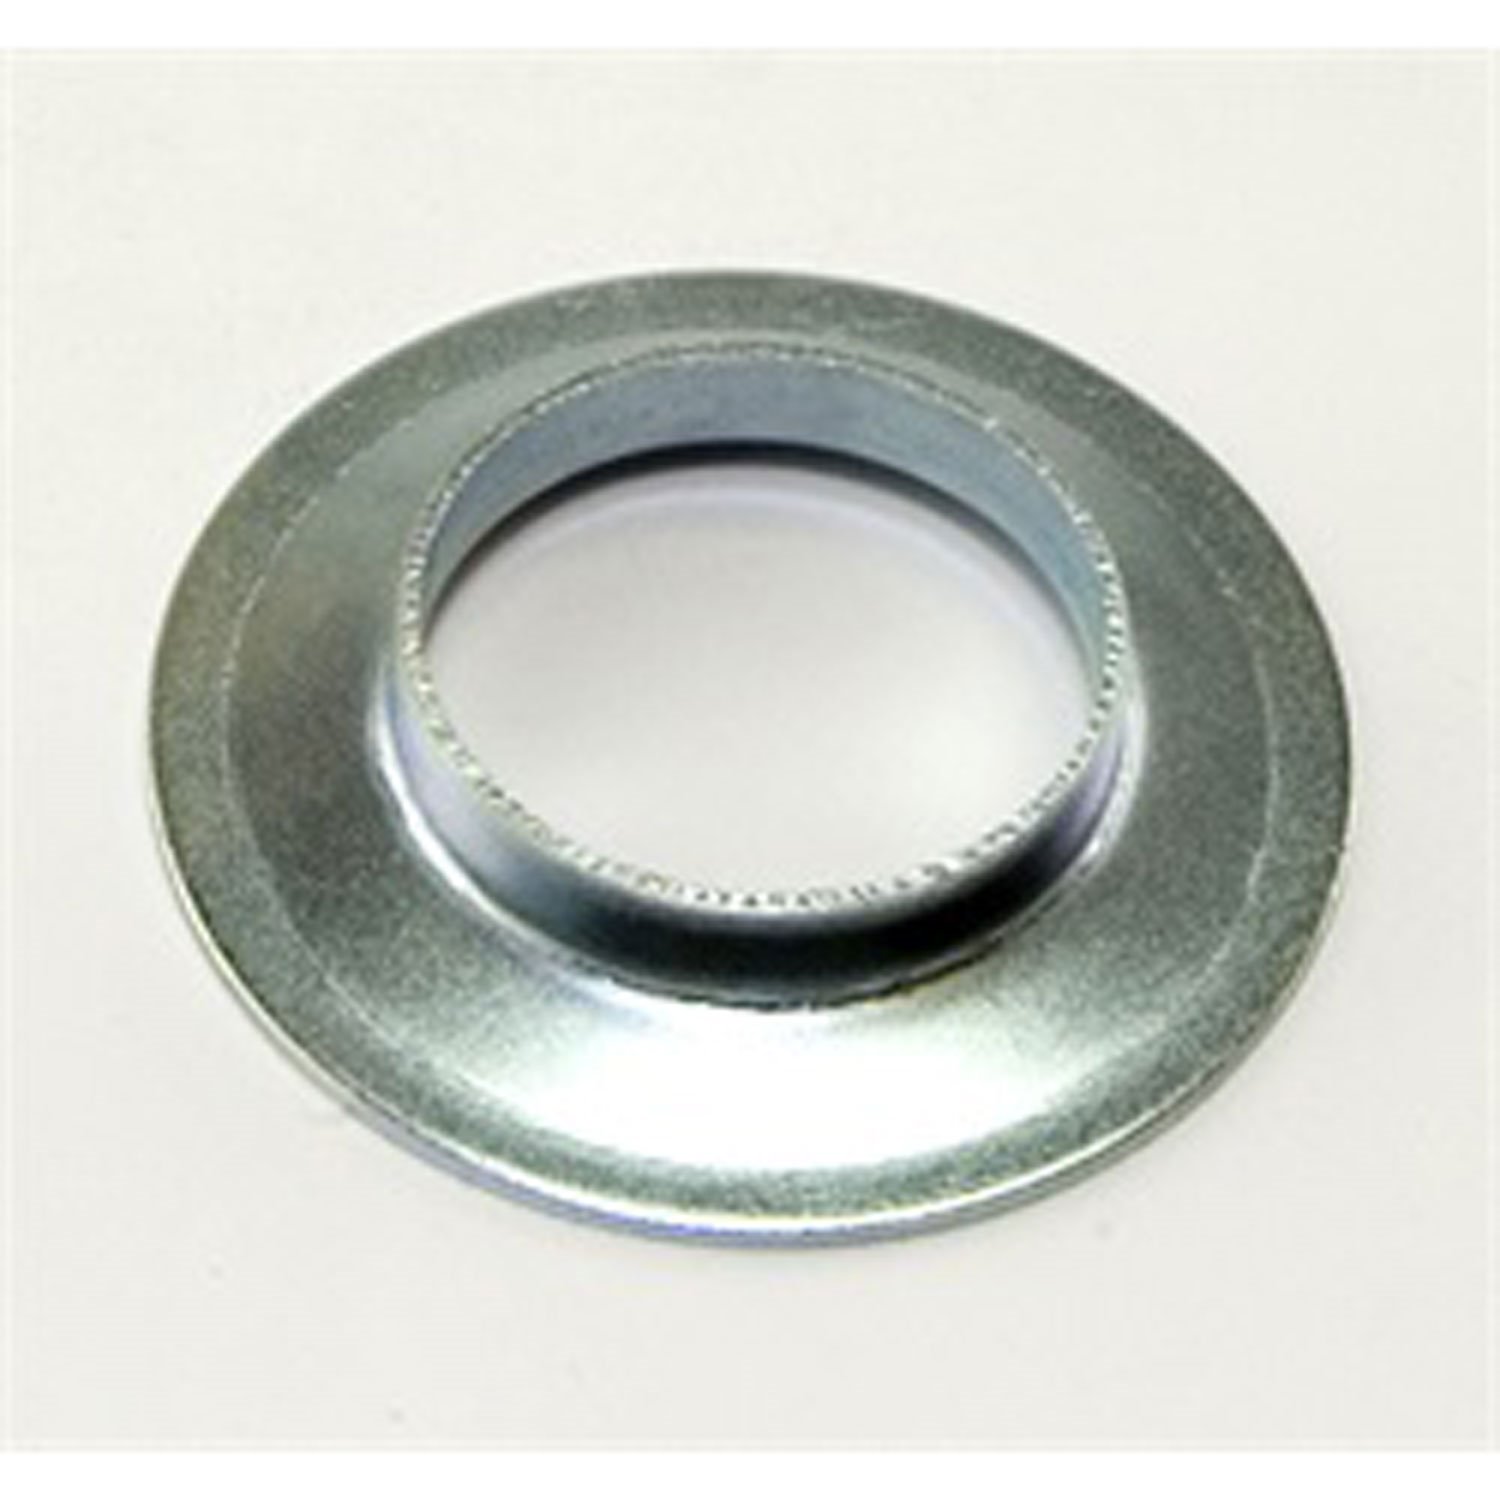 This inner axle dust shield for from Omix-ADA fits 72-86 Jeep CJ models.